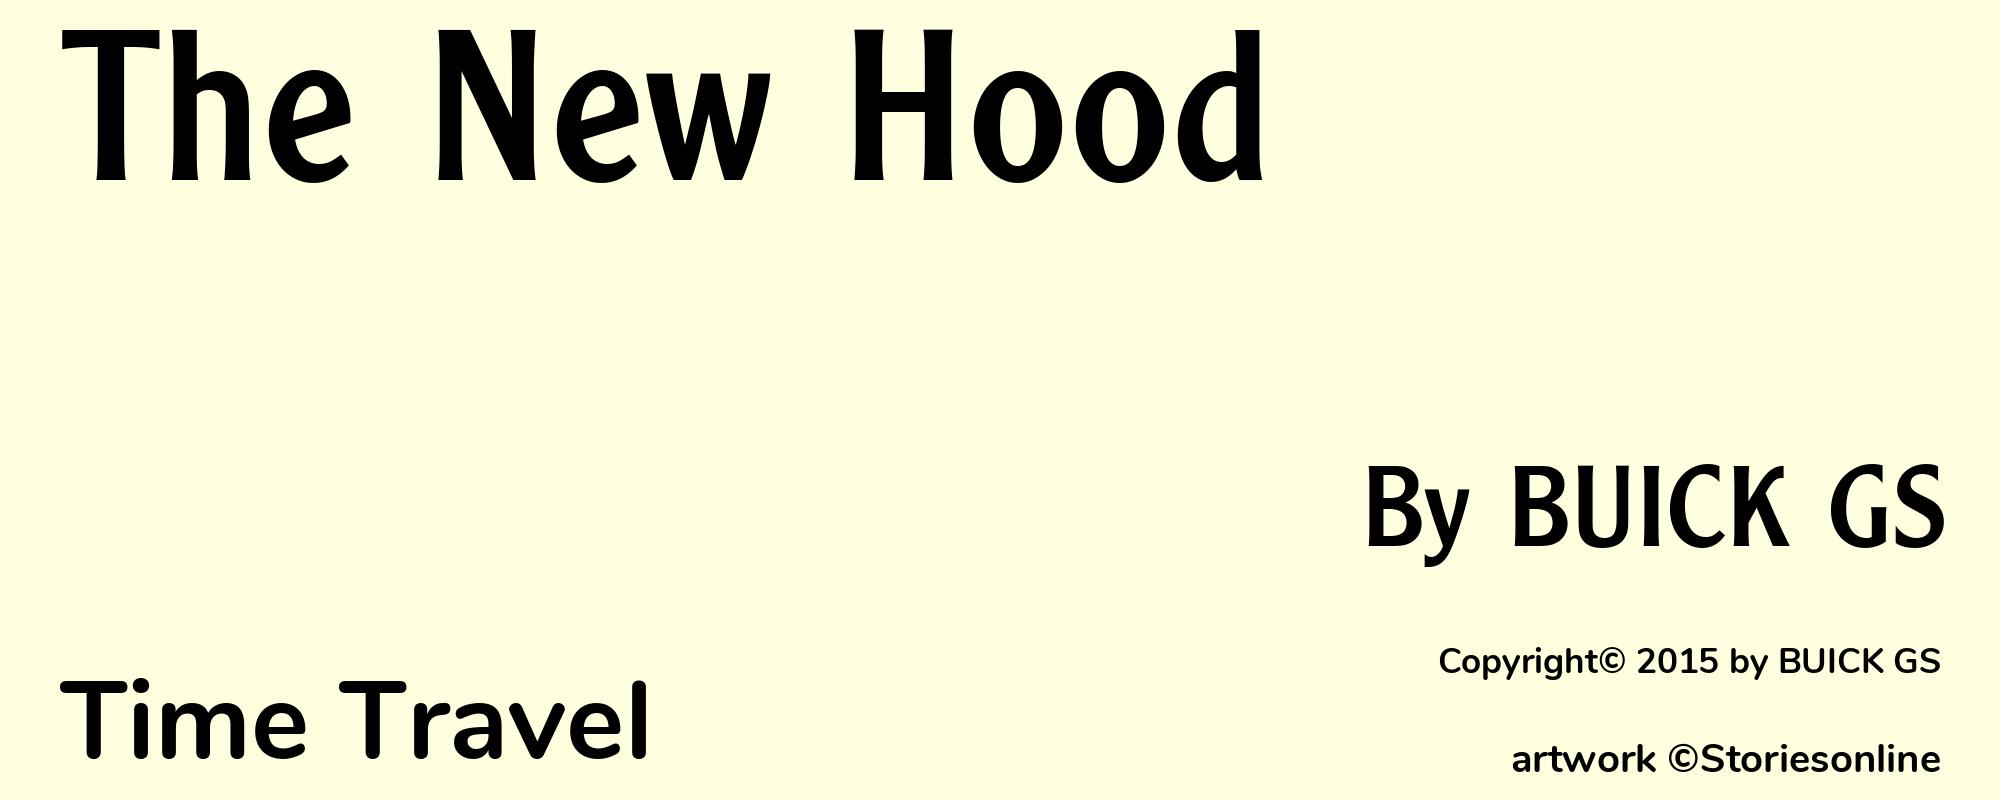 The New Hood - Cover